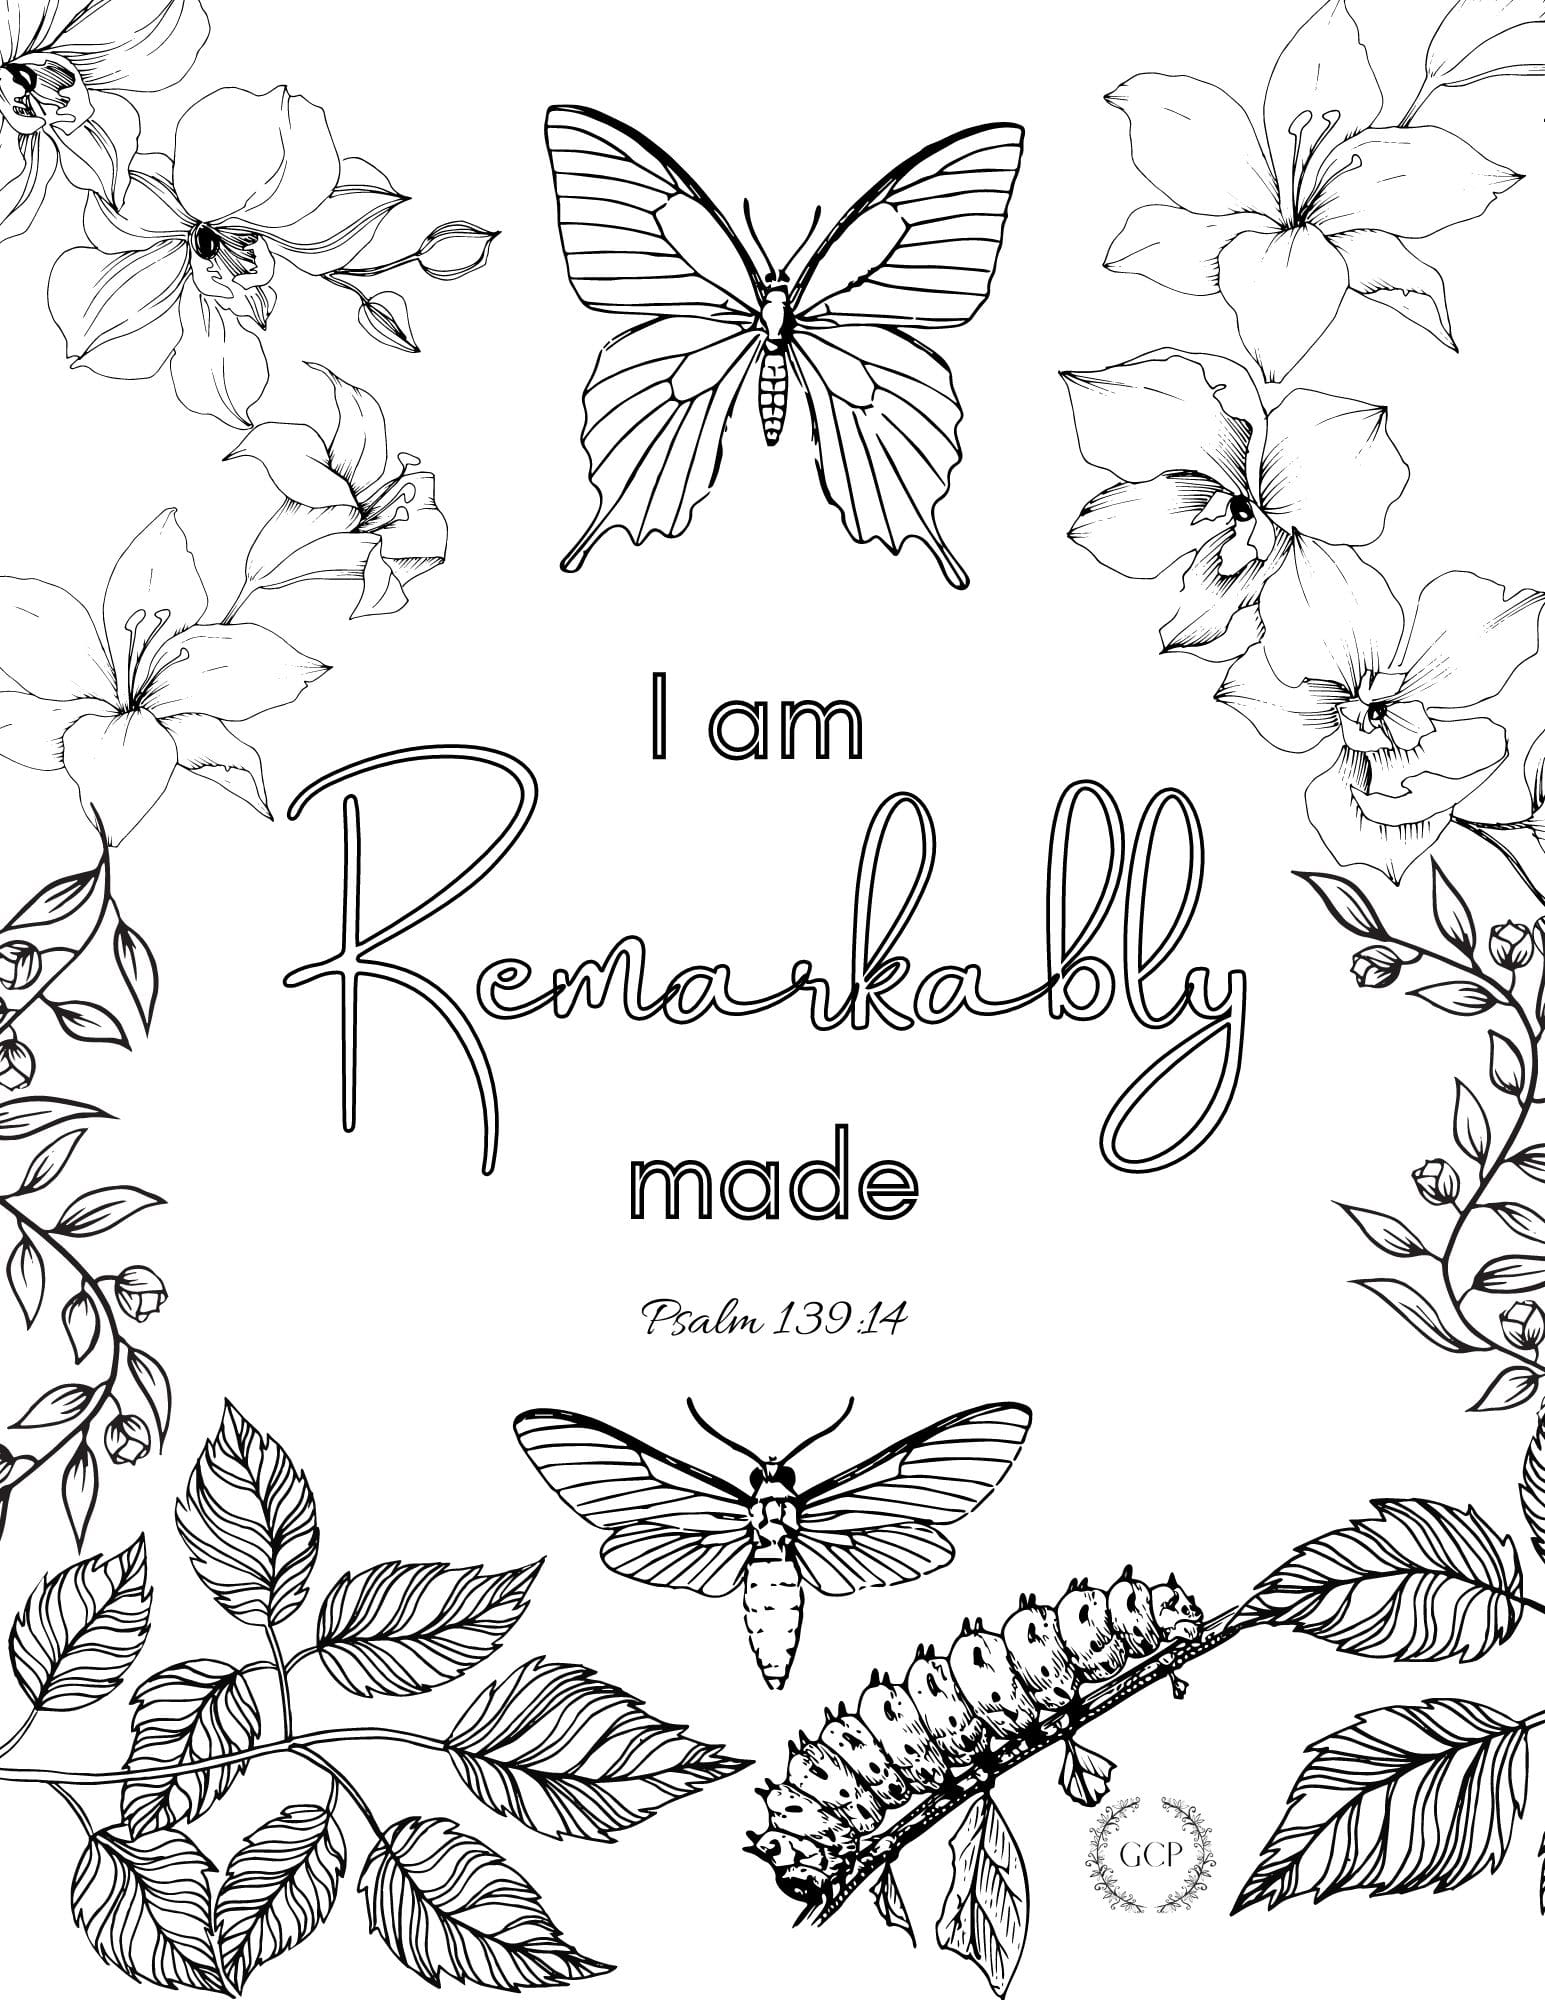 20 Printable Scripture Coloring Pages for Adults   Happier Human